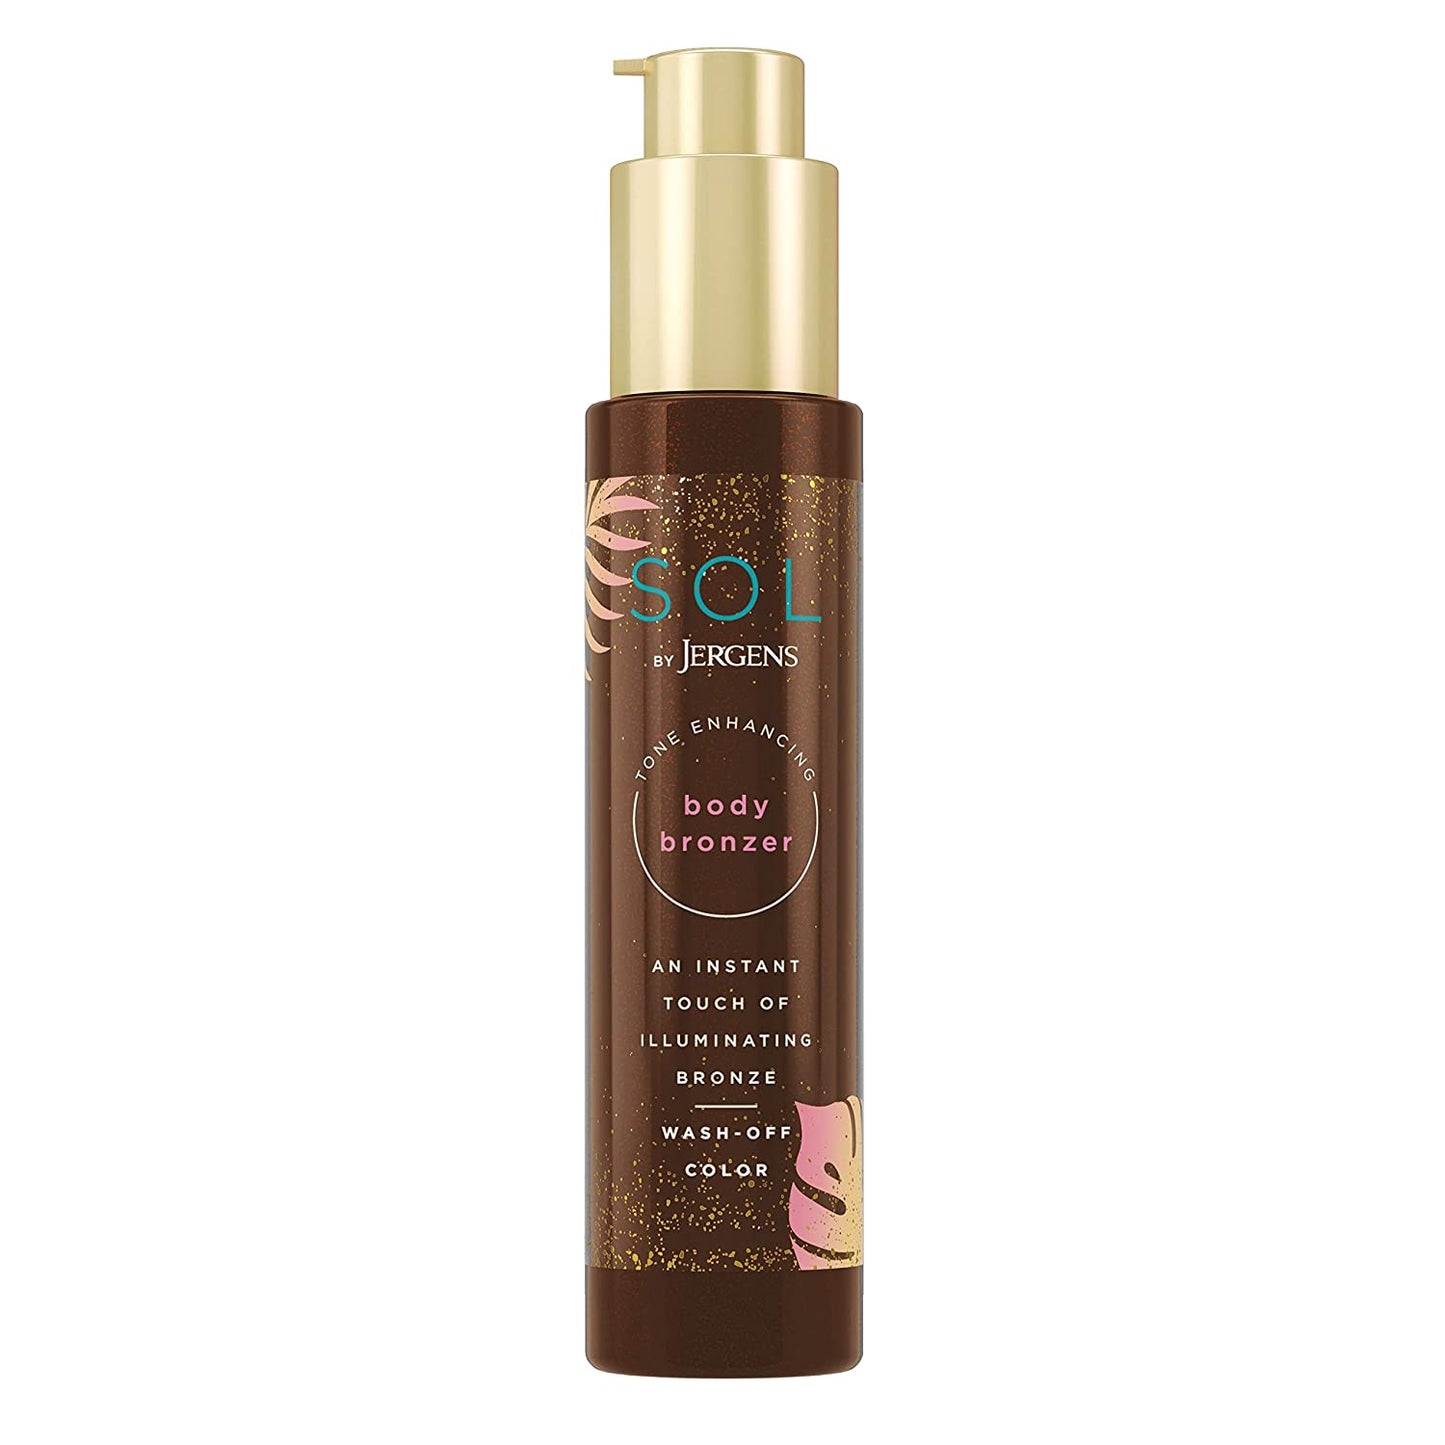 SOL by Jergens Self Tanner Body Bronzer 3.4 Ounces per Bottle (Case Of 12)